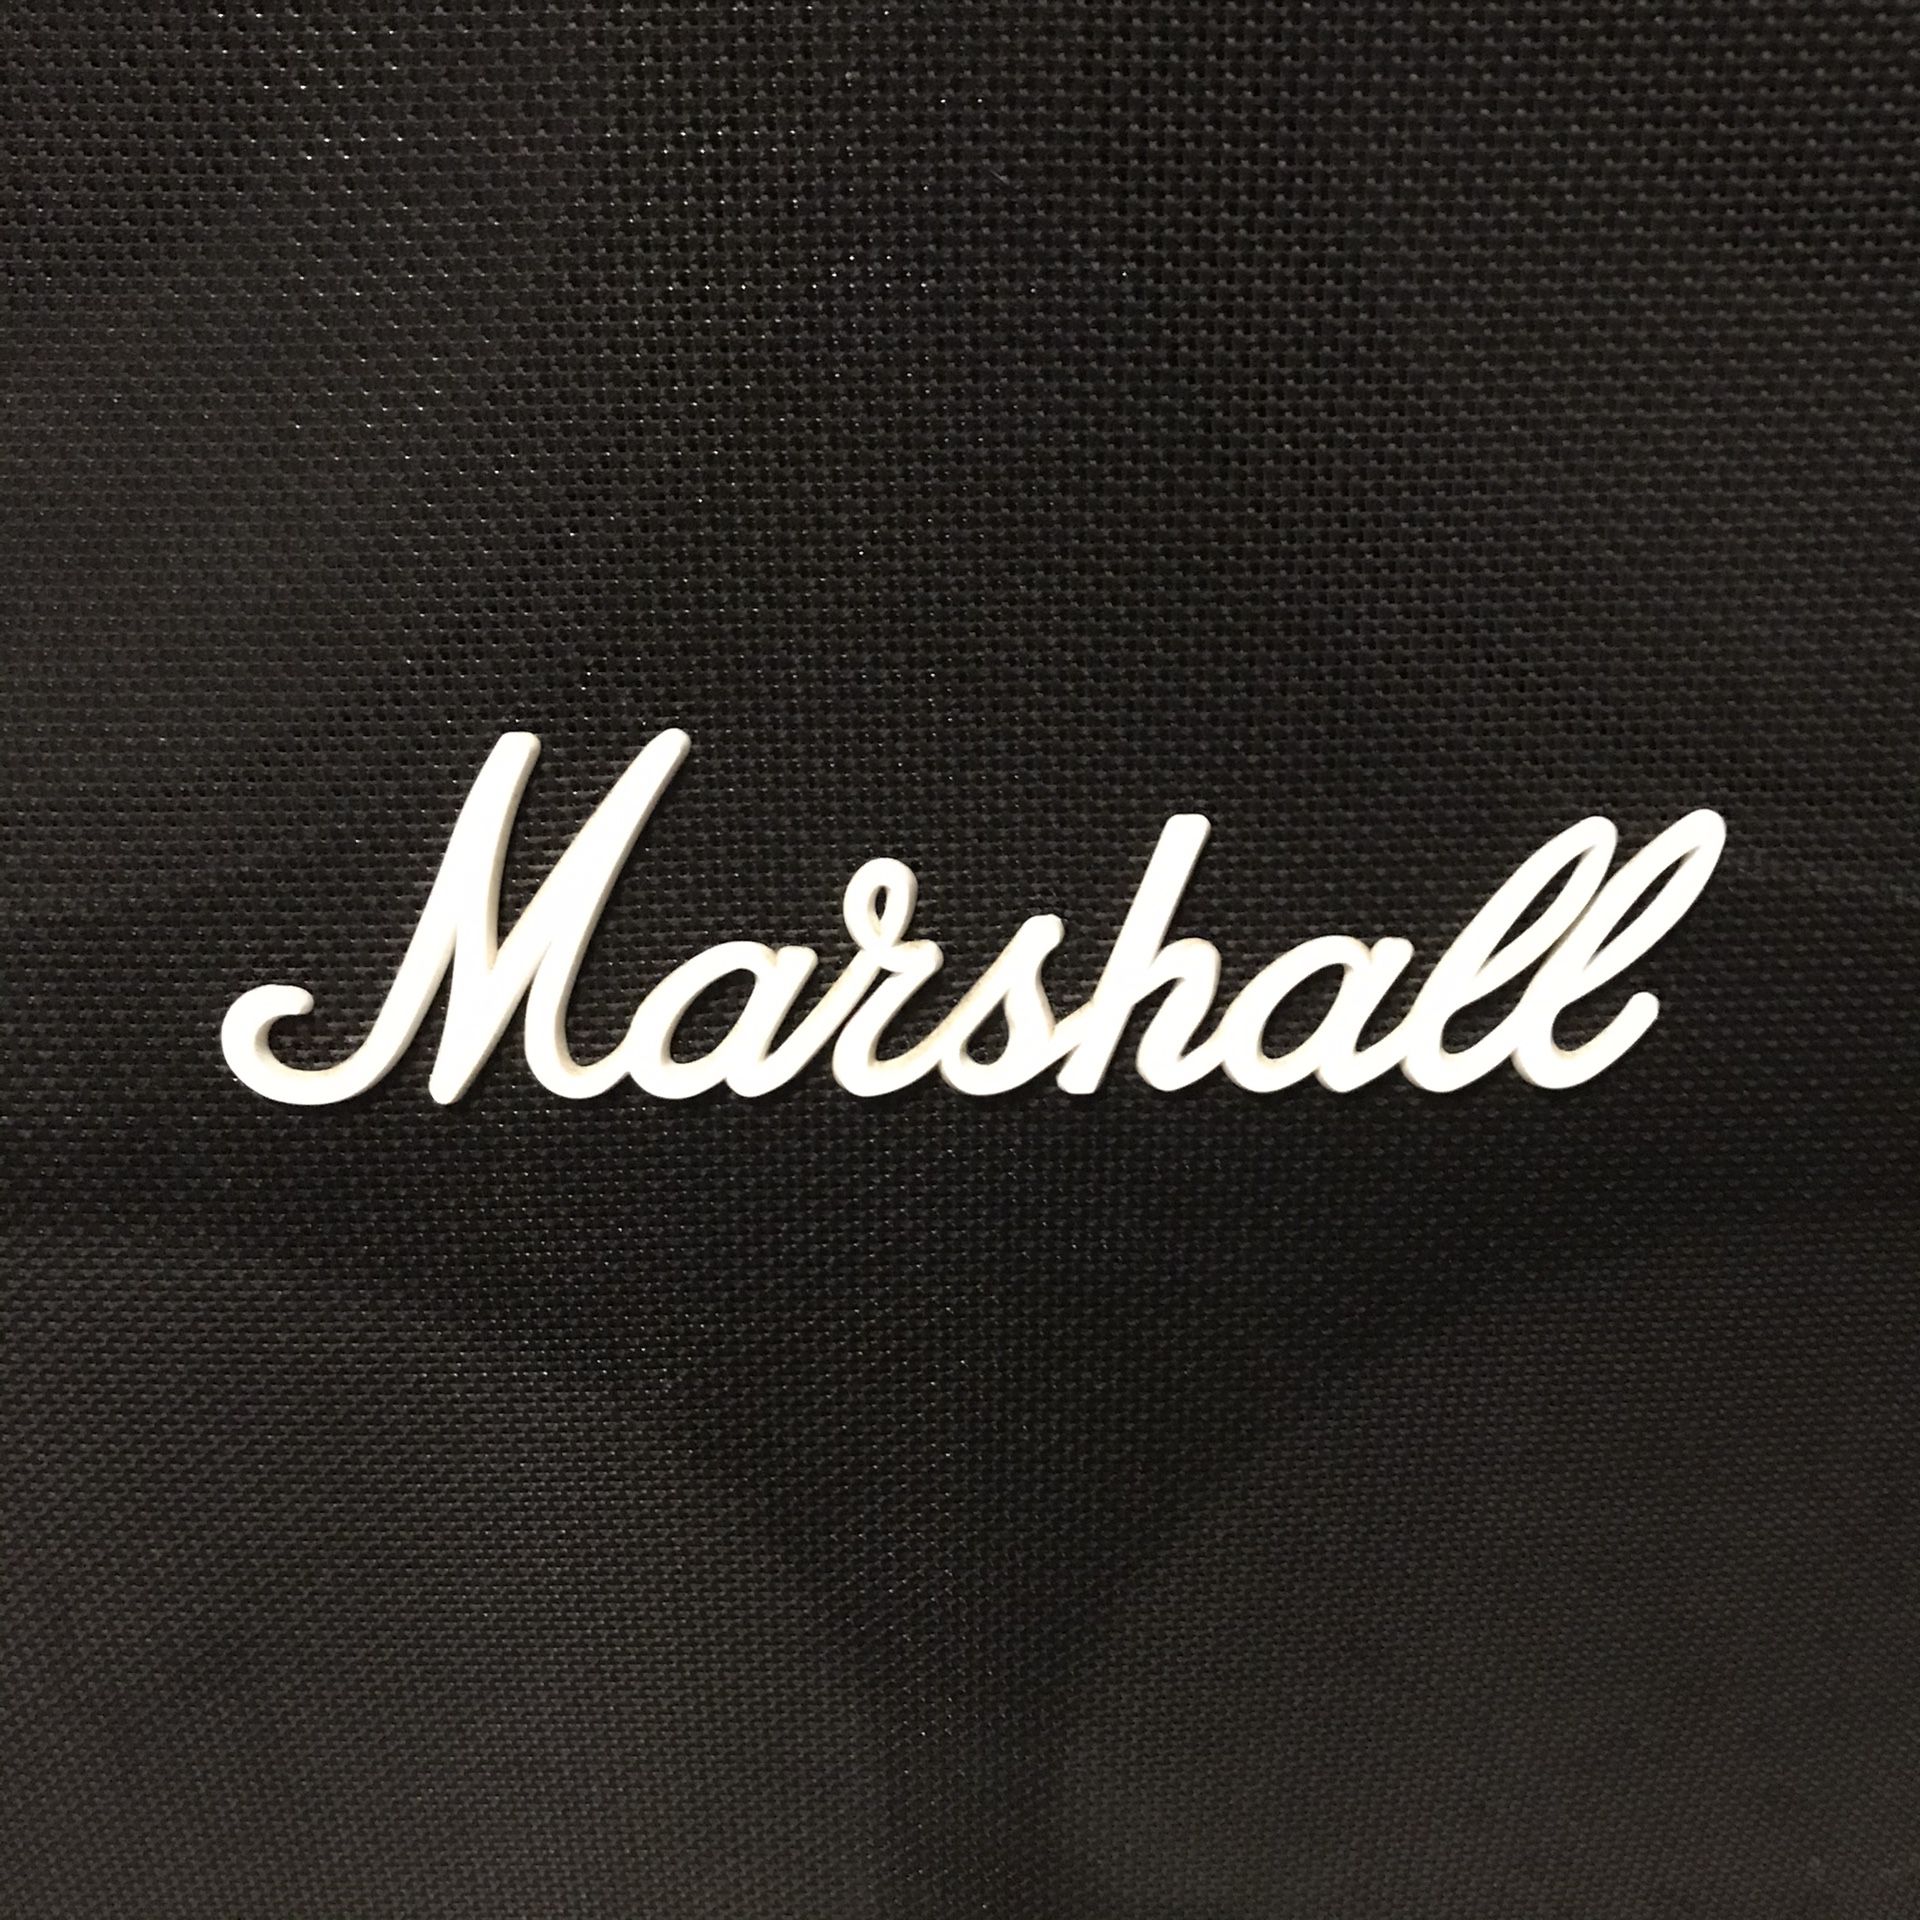 MARSHALL MG 412A 4x12 Guitar Speaker Cabinet